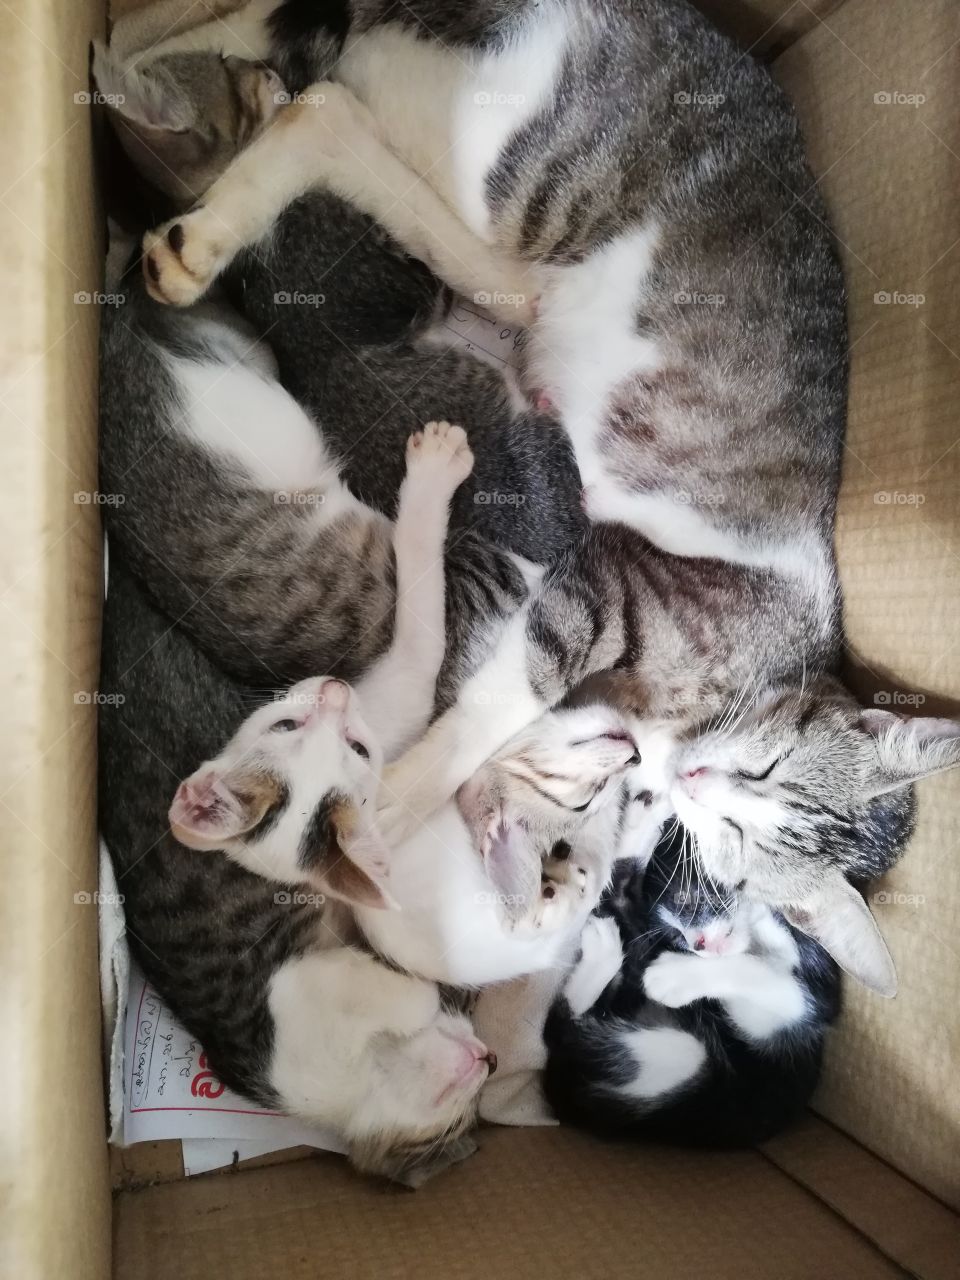 Kittens with mother cat